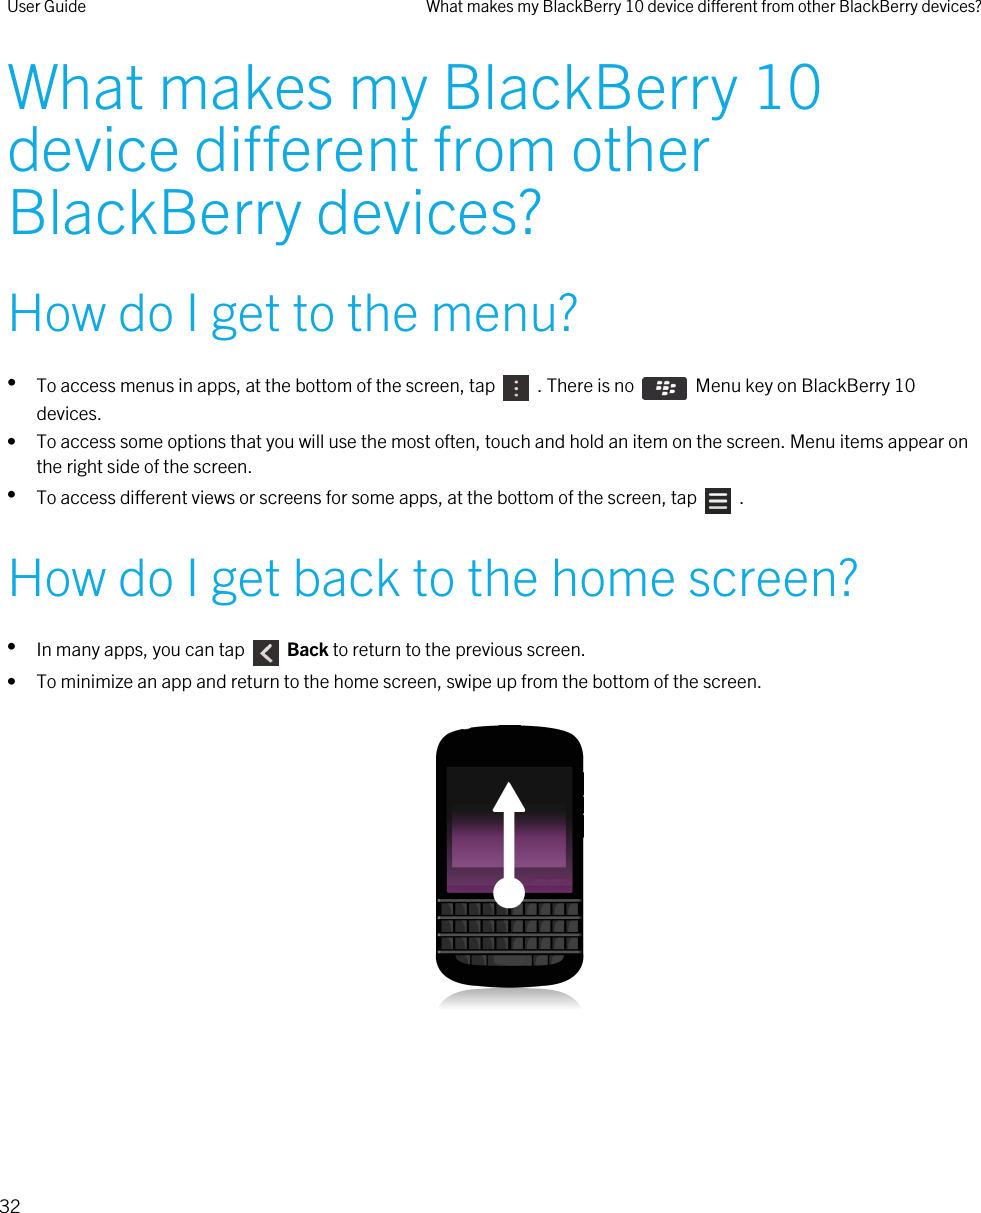 What makes my BlackBerry 10 device different from other BlackBerry devices?How do I get to the menu?•To access menus in apps, at the bottom of the screen, tap    . There is no    Menu key on BlackBerry 10 devices.• To access some options that you will use the most often, touch and hold an item on the screen. Menu items appear on the right side of the screen.•To access different views or screens for some apps, at the bottom of the screen, tap    .How do I get back to the home screen?•In many apps, you can tap    Back to return to the previous screen.• To minimize an app and return to the home screen, swipe up from the bottom of the screen.  User Guide What makes my BlackBerry 10 device different from other BlackBerry devices?32 